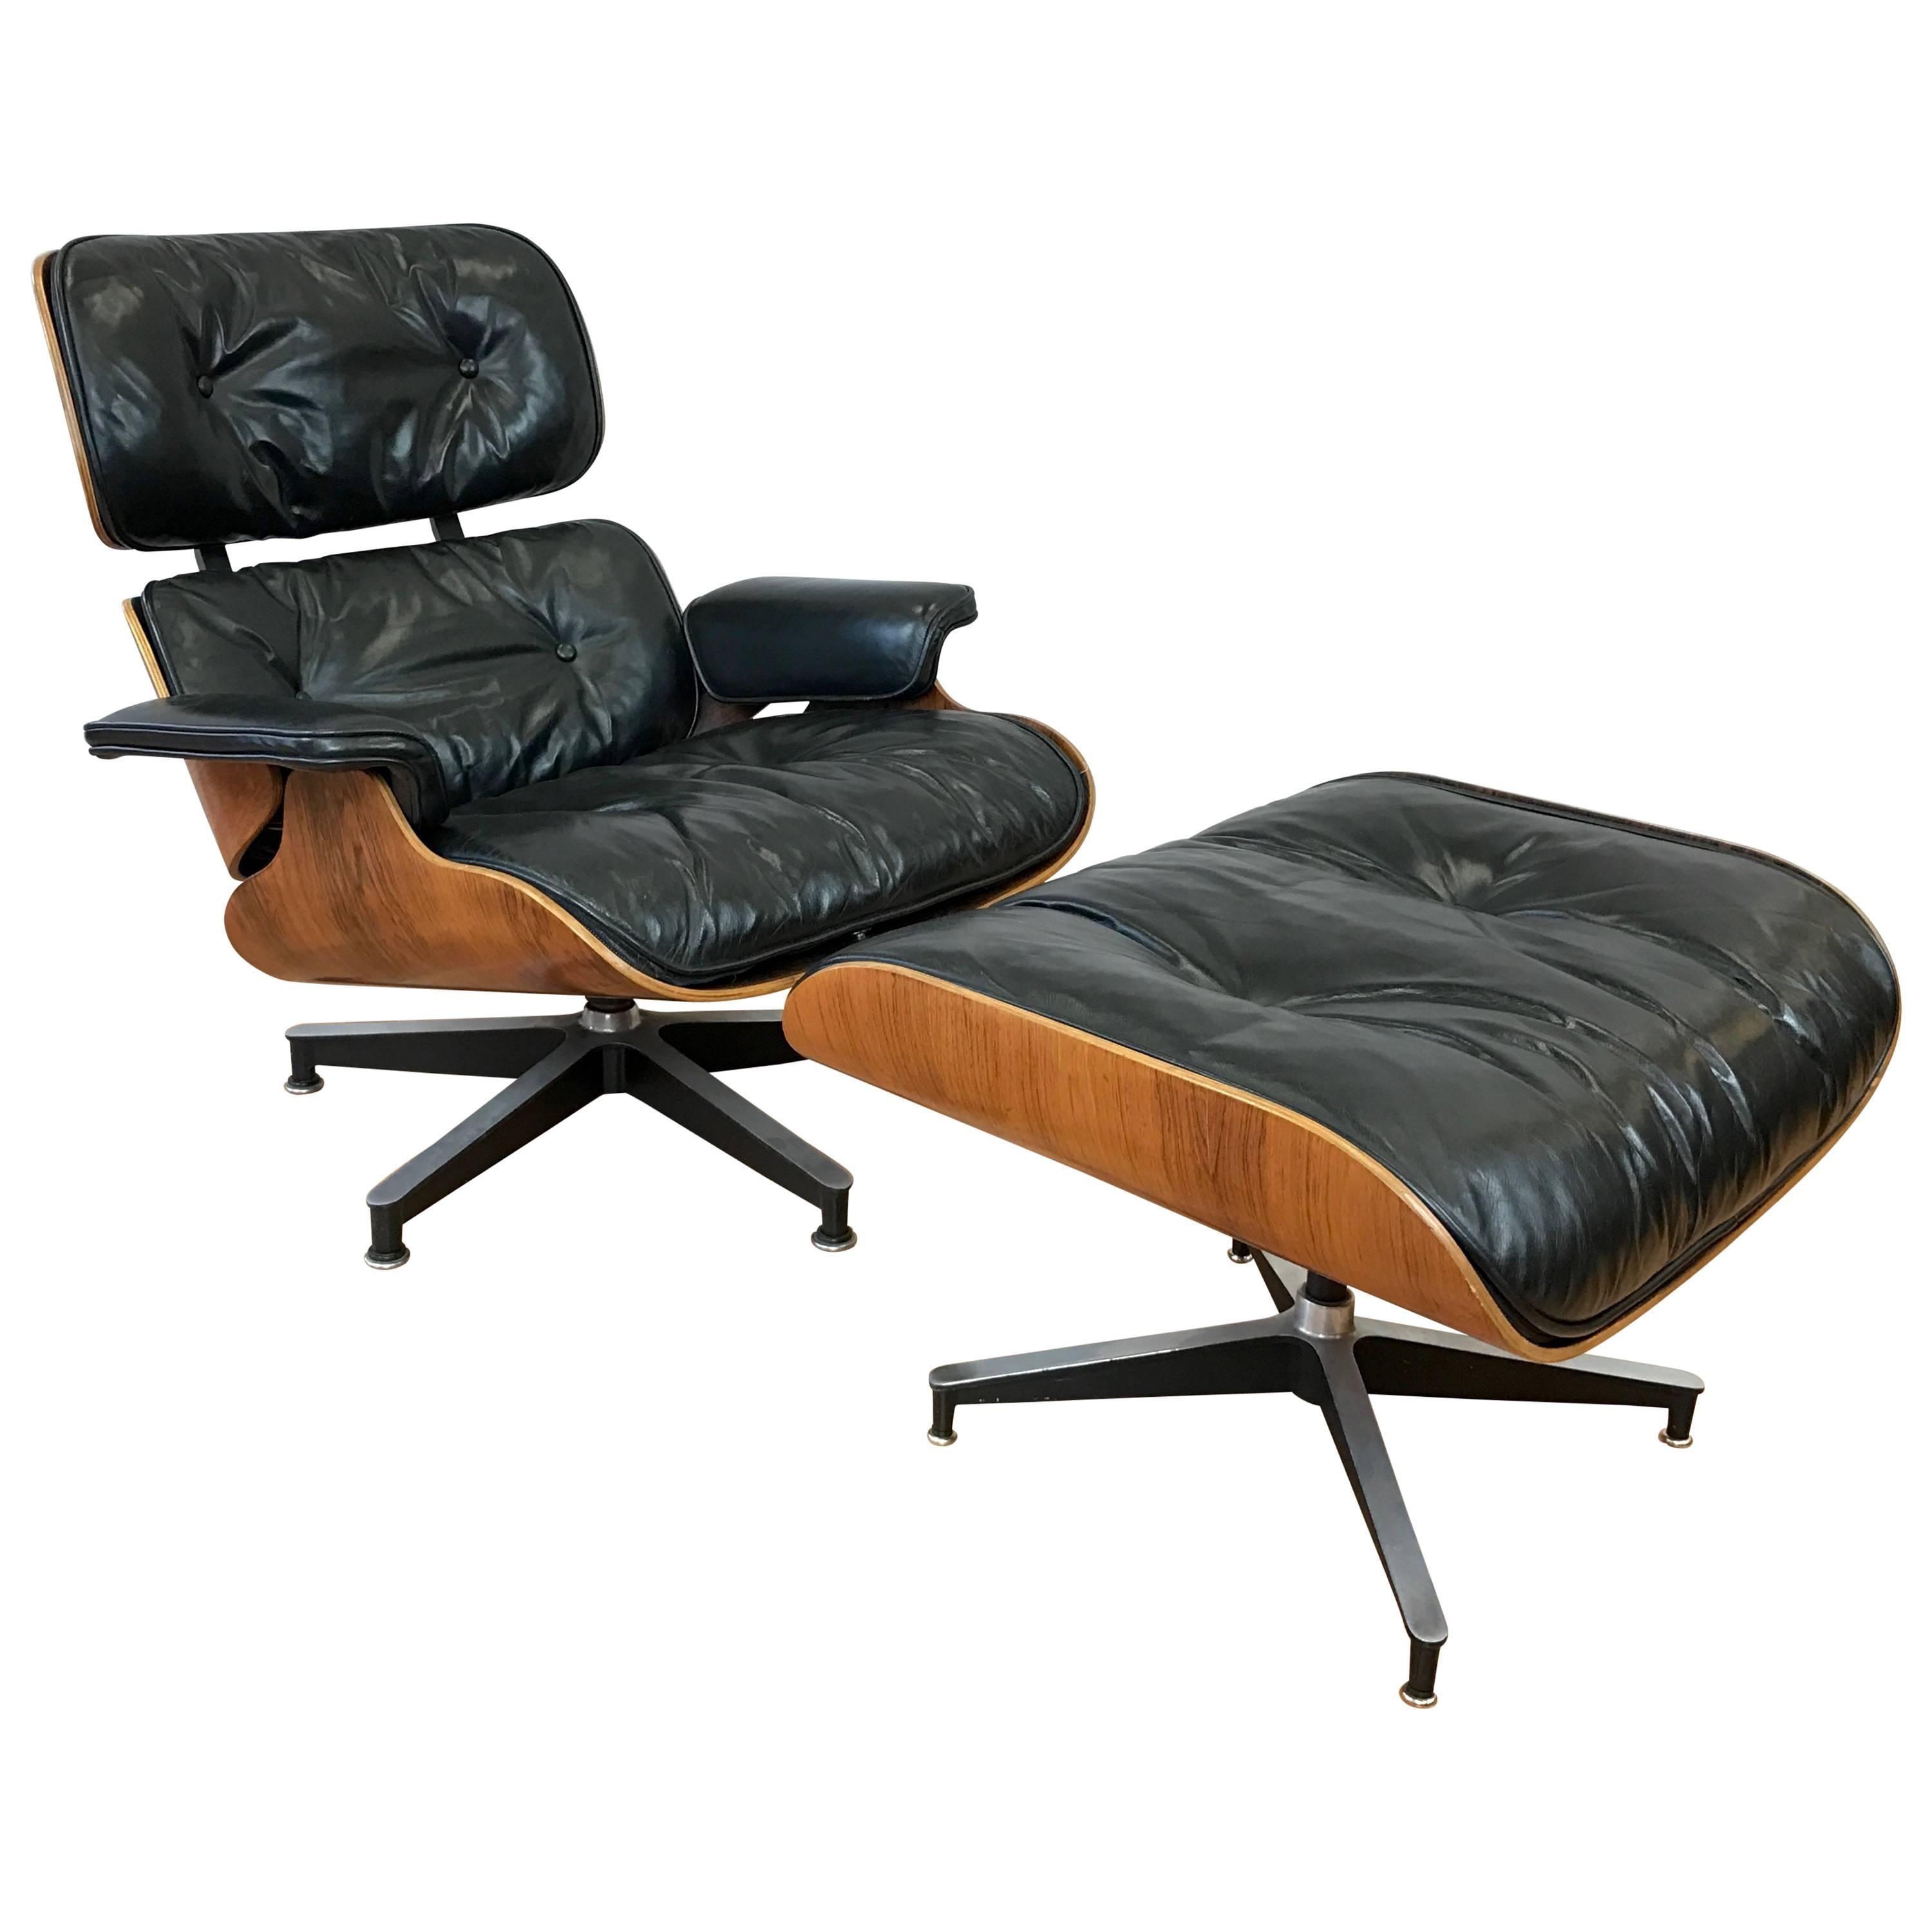 Vintage Eames Model 670 Lounge Chair & Ottoman in Rosewood and Black Leather